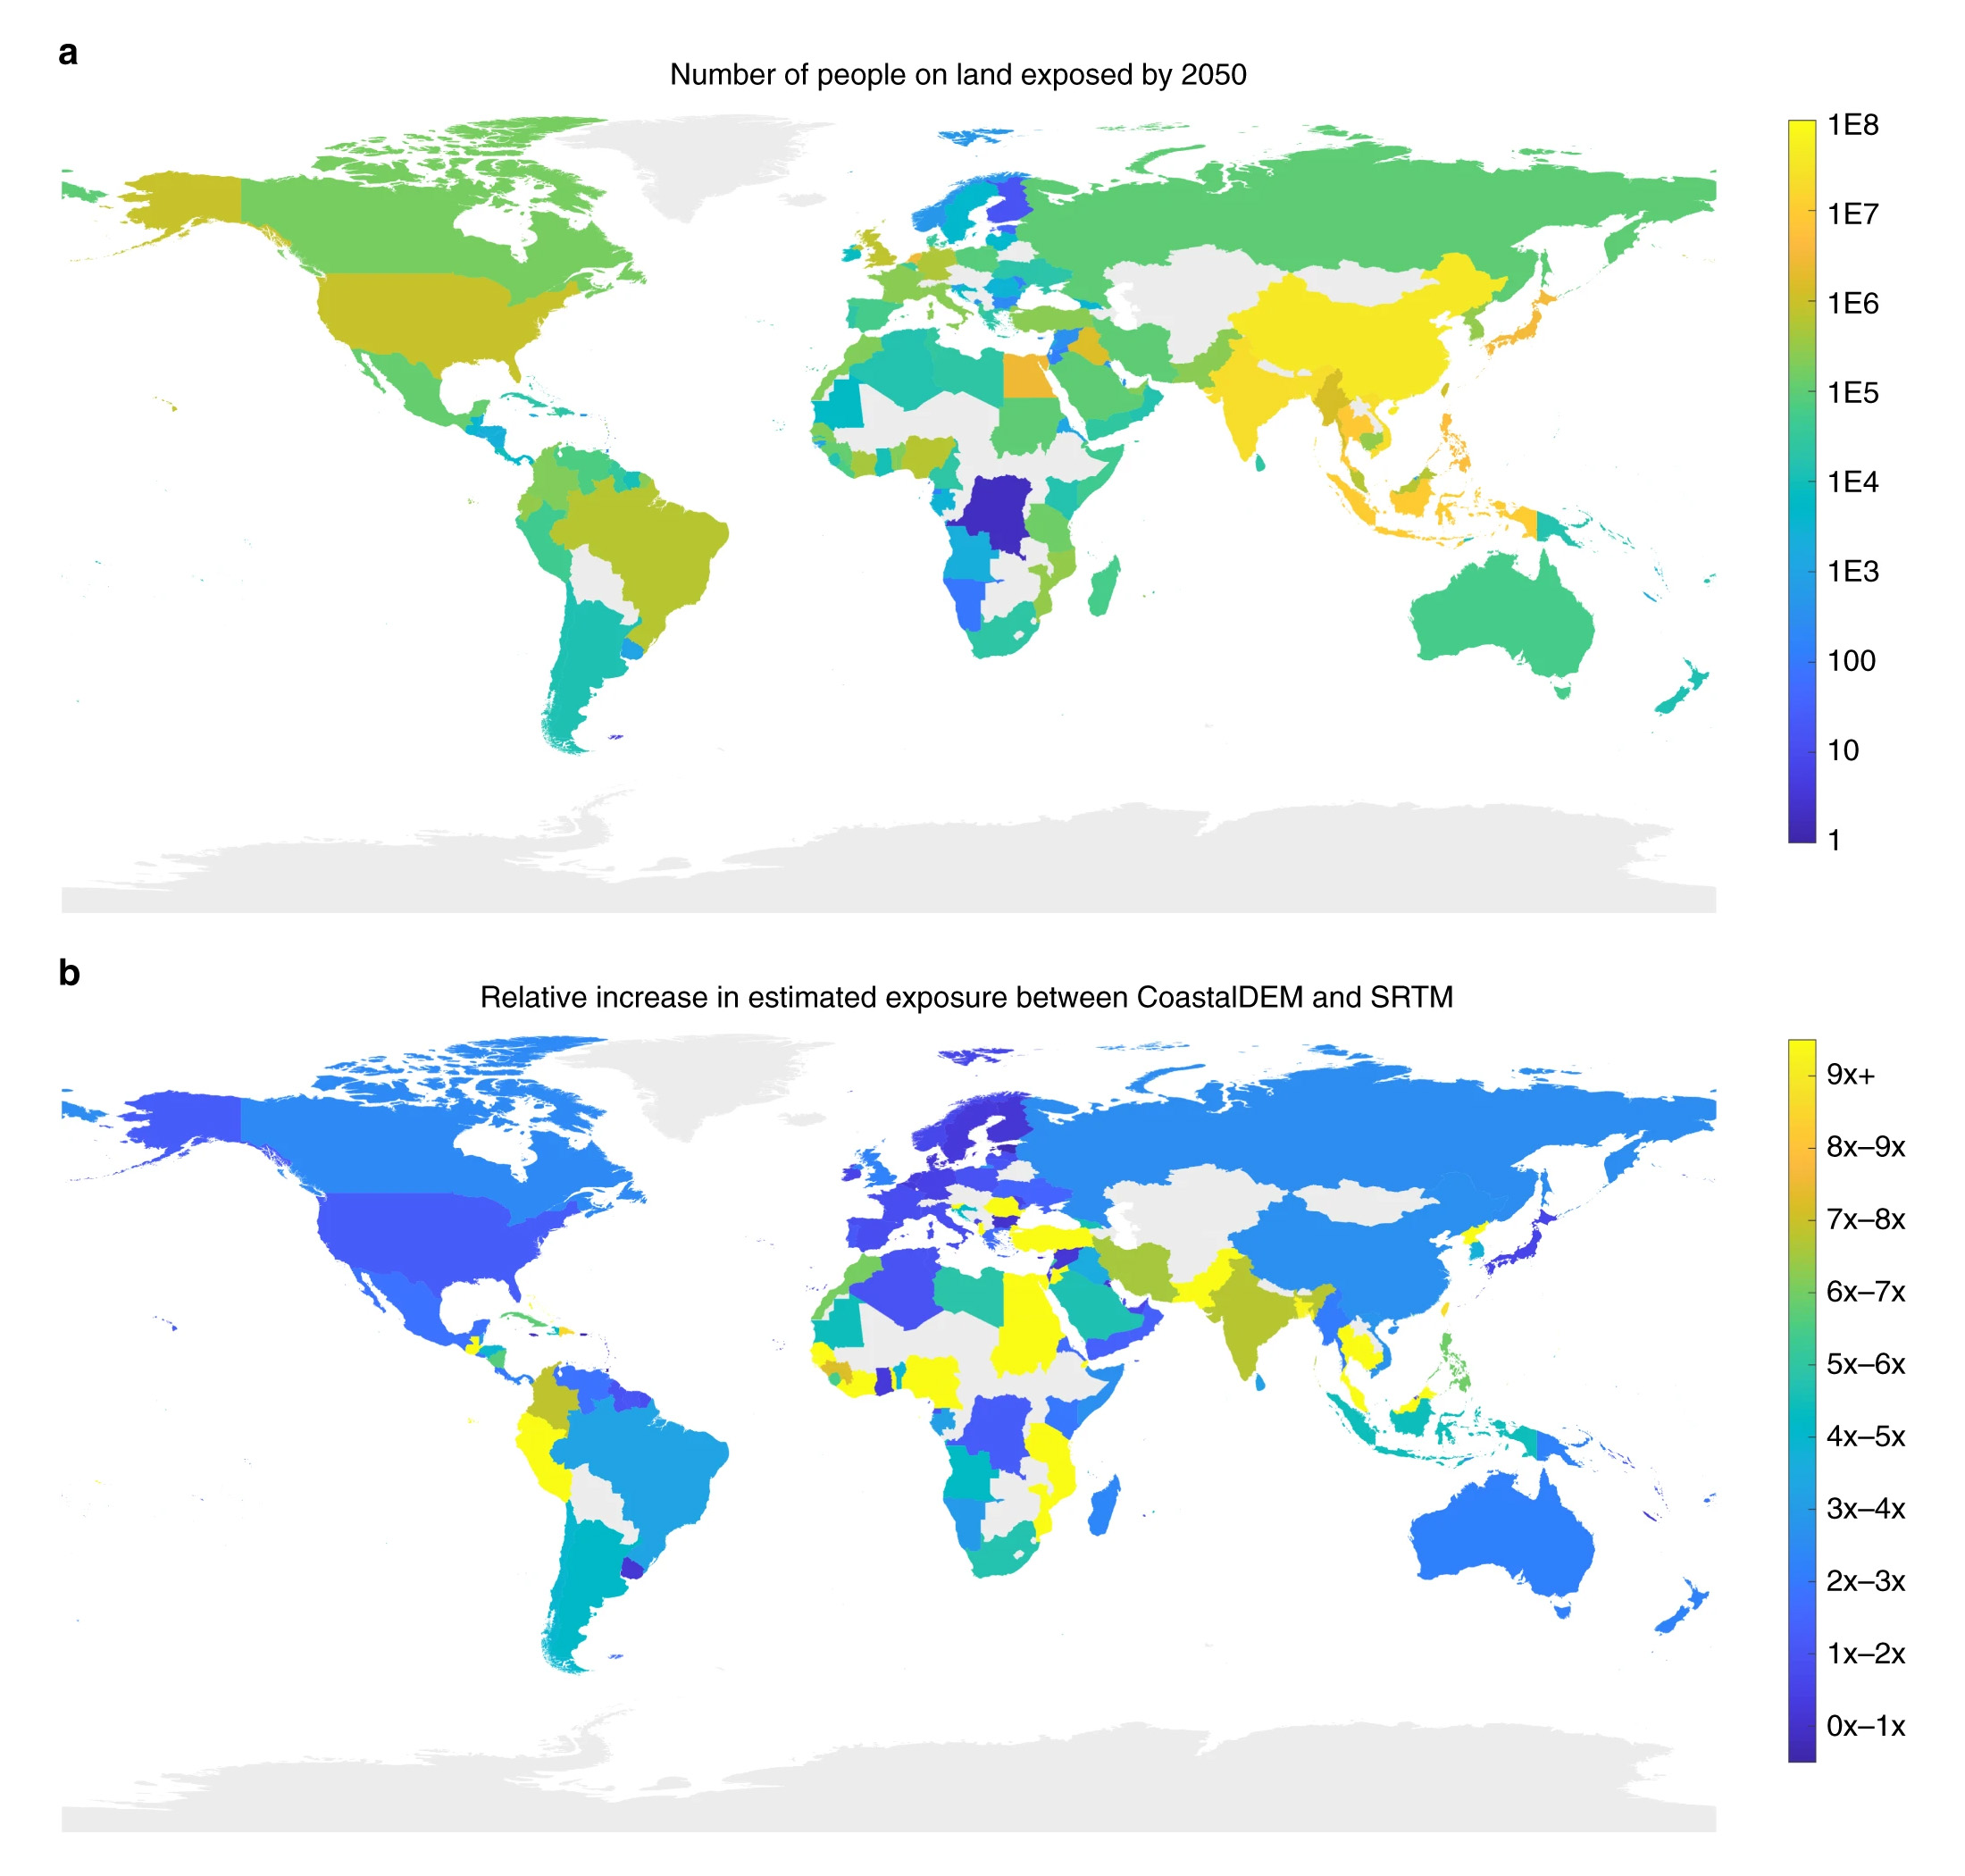 populations threatened by water nature 2019